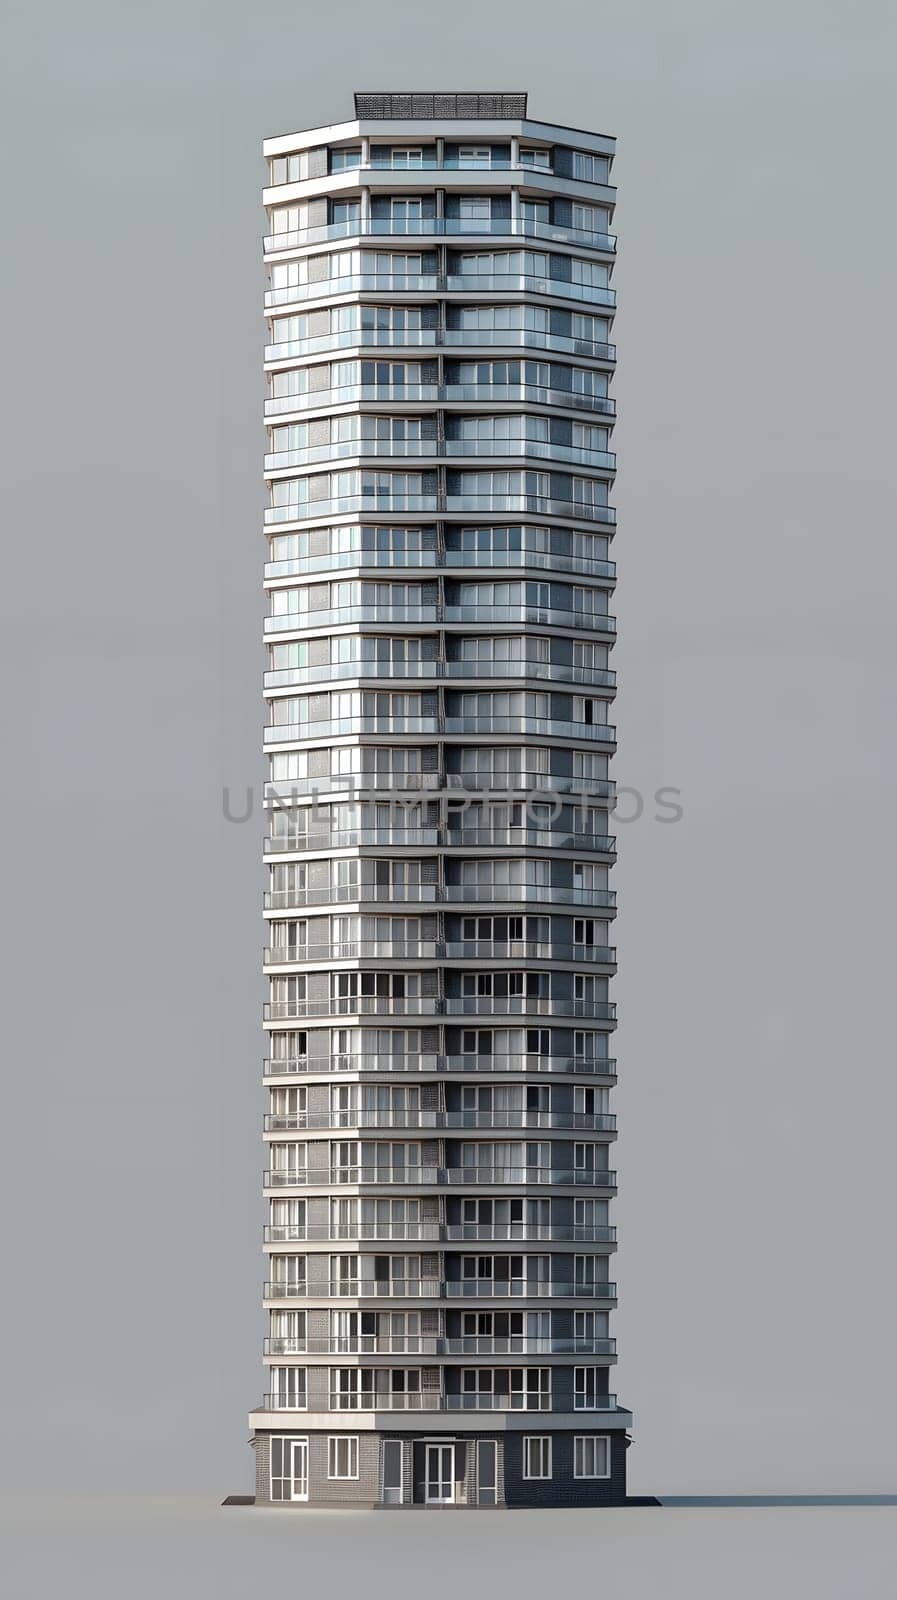 Skyscraper with numerous windows and balconies in urban design by Nadtochiy